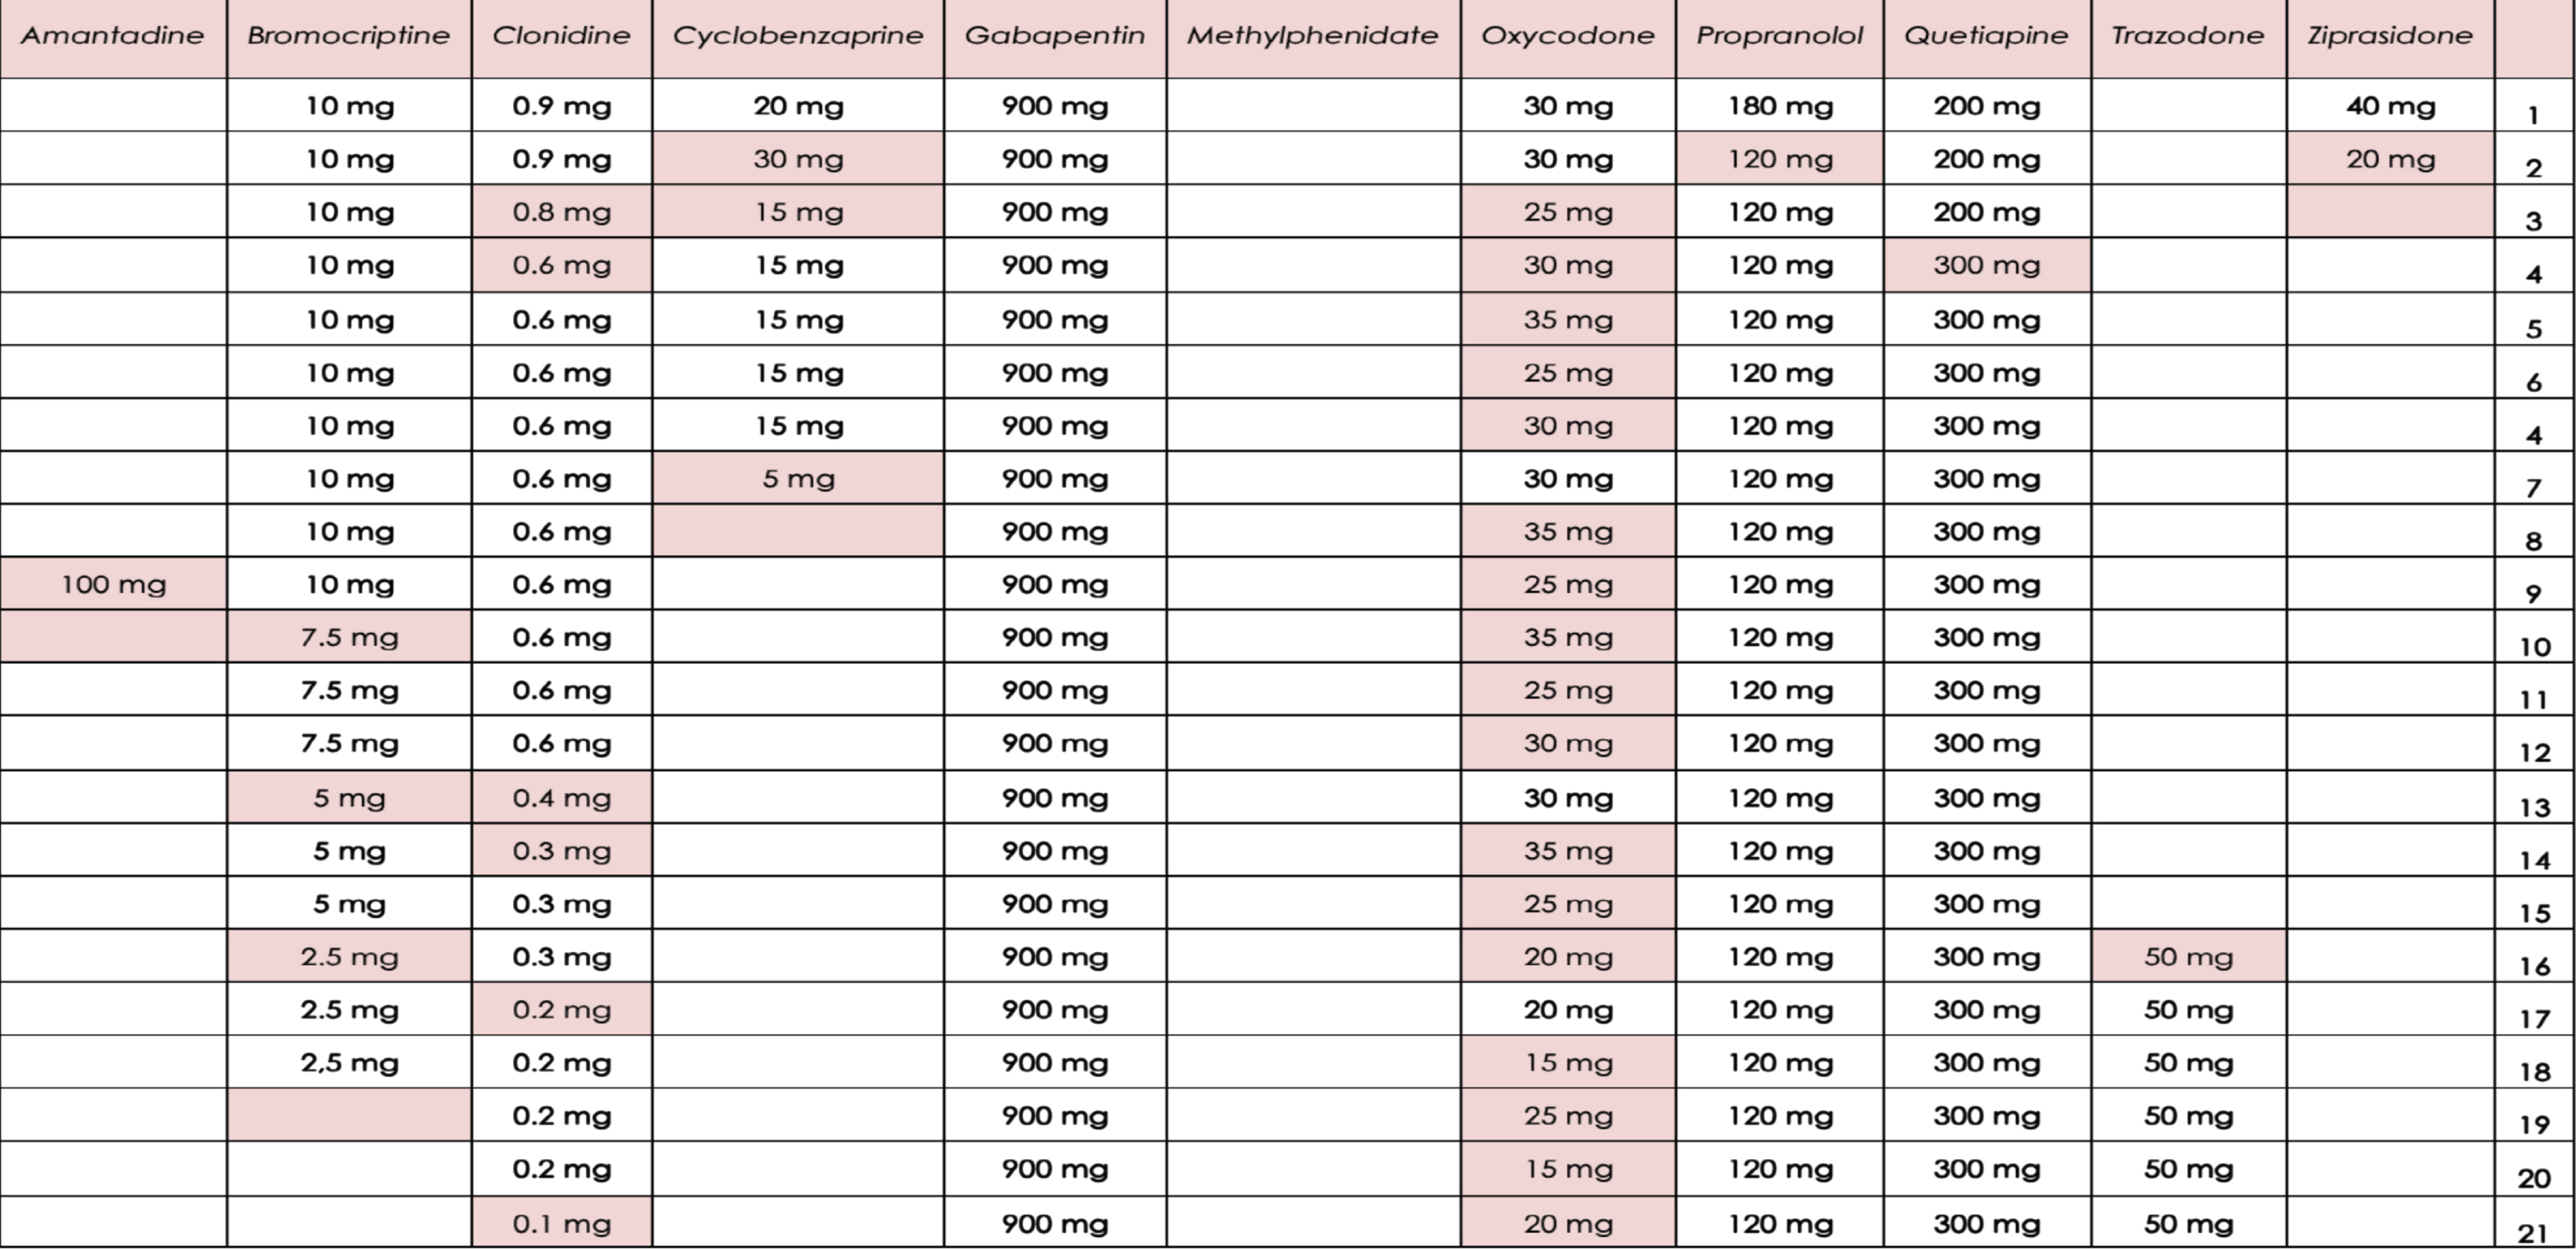 An example of part of a table used to track pharmacological management of a patient. Changes in medications are highlighted to aid the team in assessing potential medication effects on behavior.